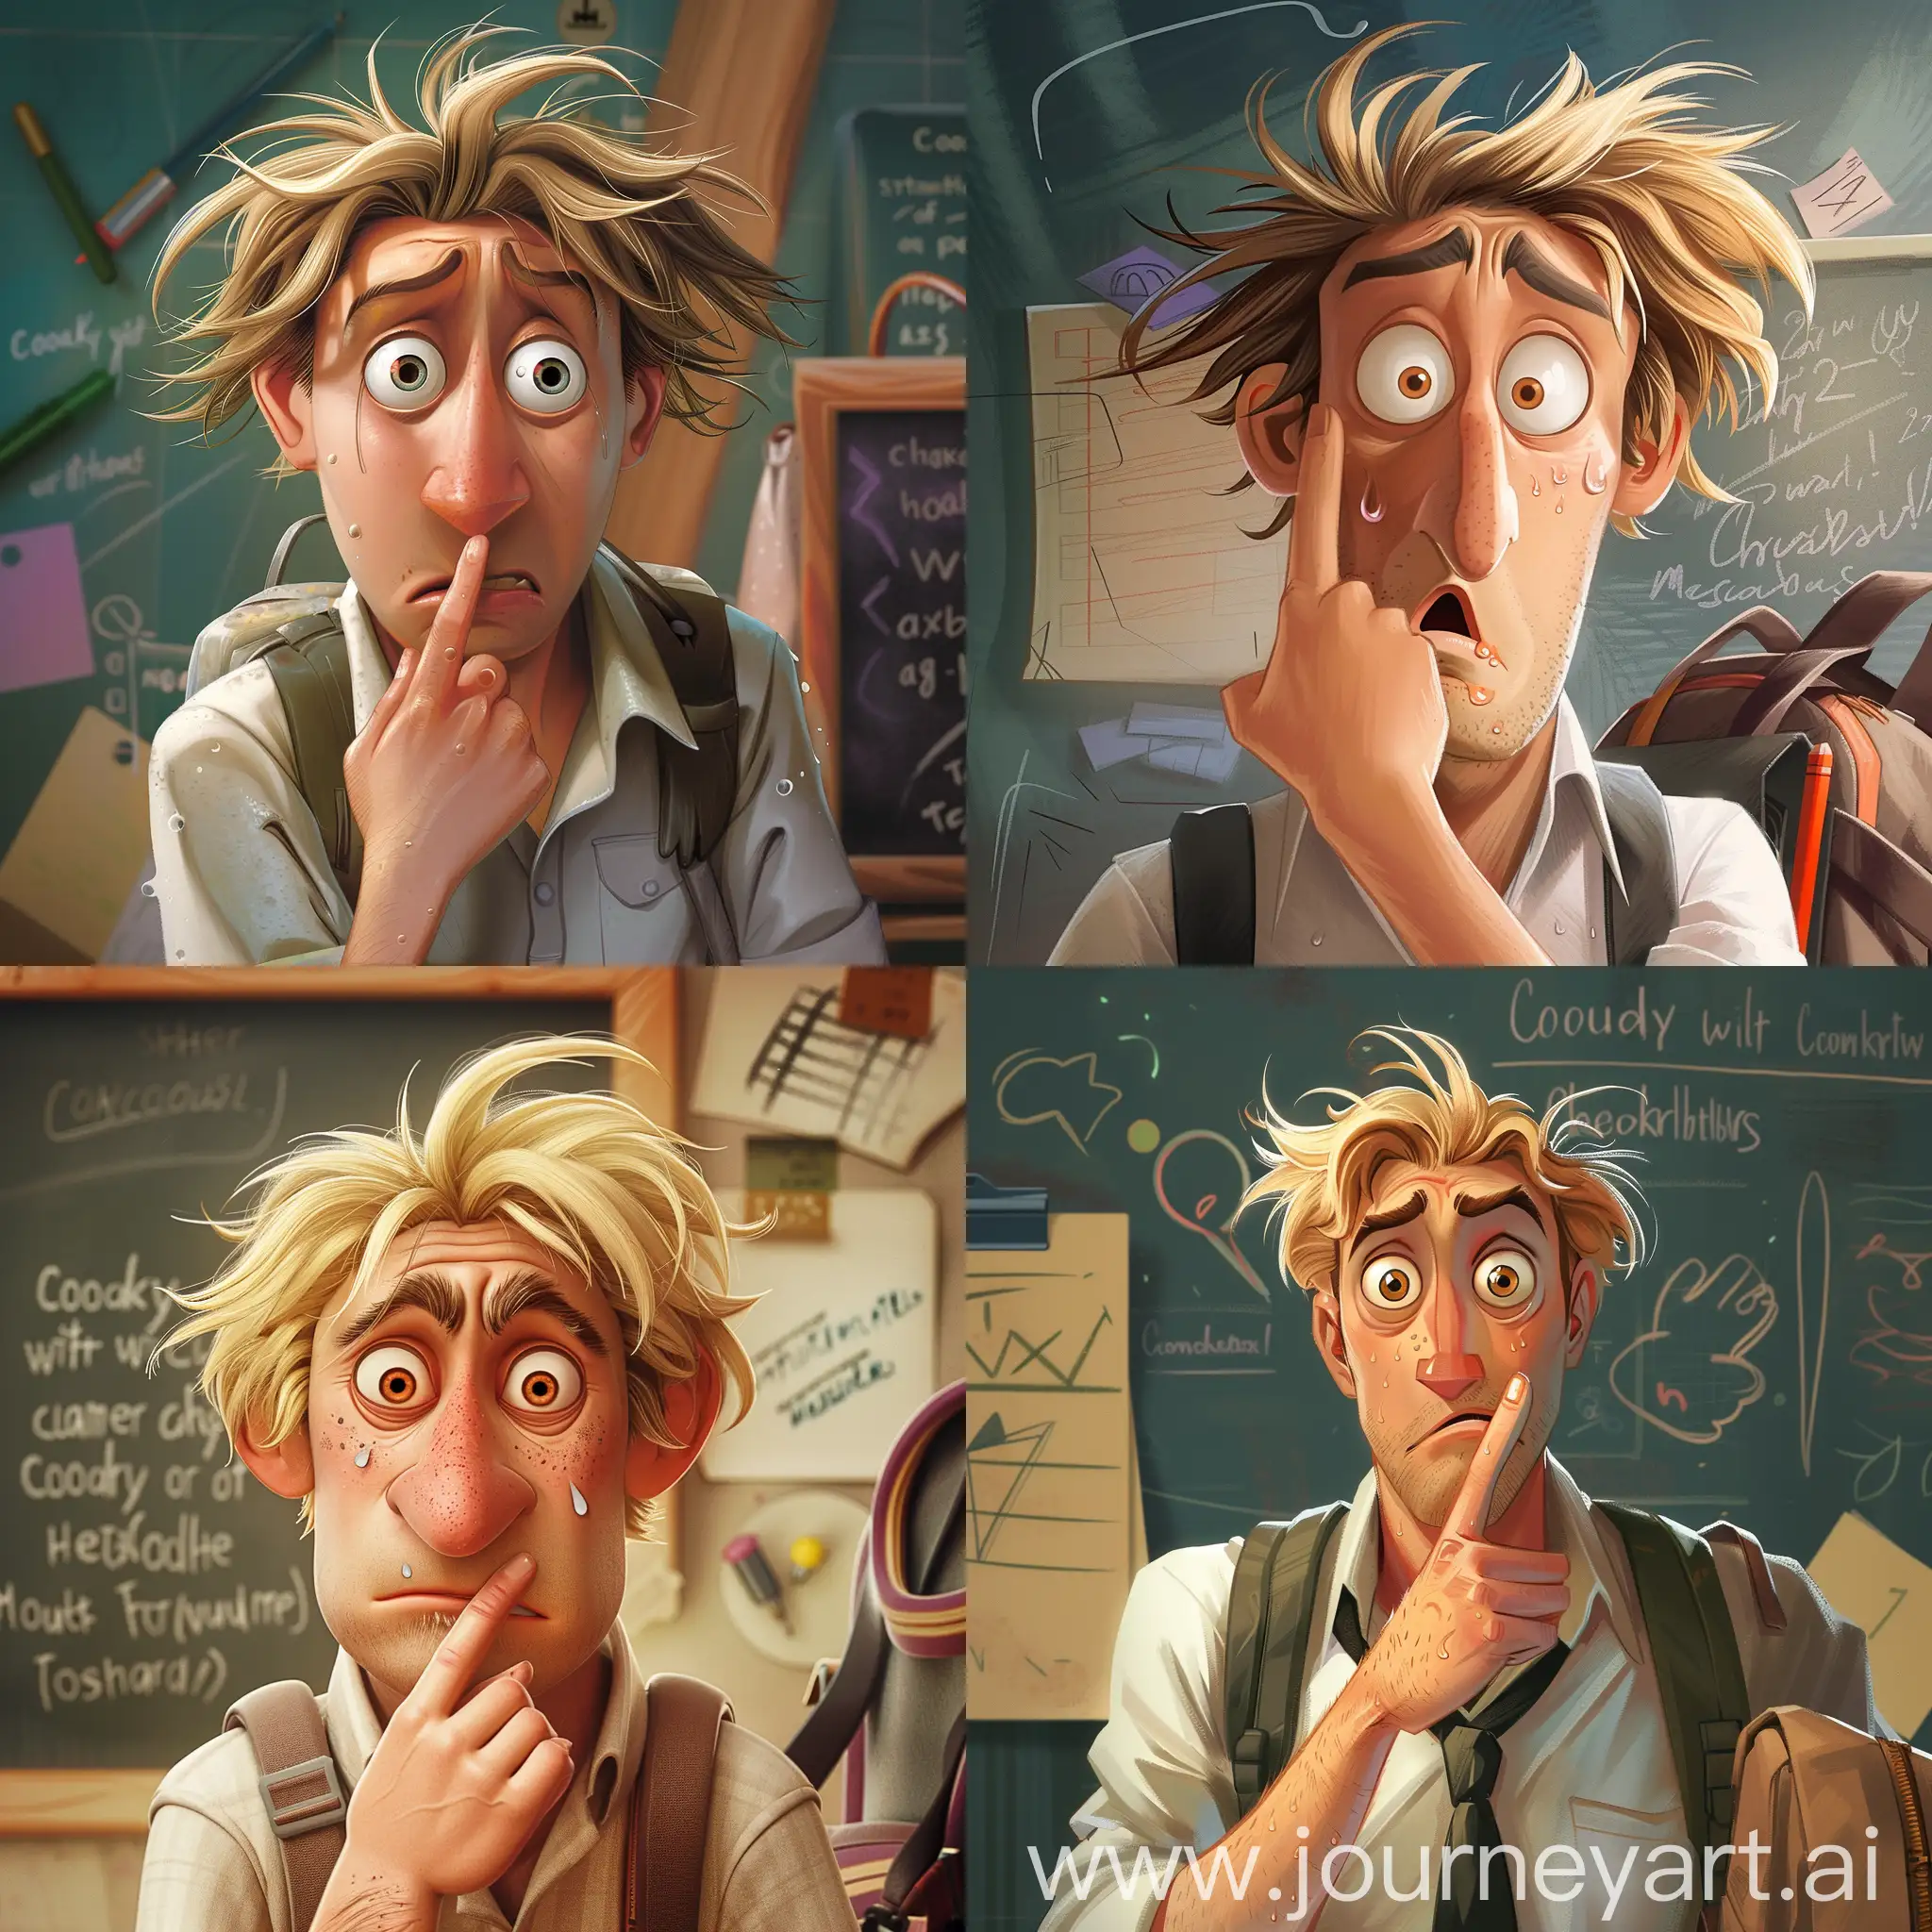 
**Concept Sketching:** Start by drafting a character with a strong resemblance to the protagonist from "Cloudy with a Chance of Meatballs," but aged up to depict a 40-year-old man with well-defined muscles, handsome features, and blonde hair. Capture his panicked expression with wide eyes and a finger pressed against tightly closed lips, along with a wary sidelong glance.

**Character Design Details:**
- Reflect the mature version of the "Cloudy with a Chance of Meatballs" character, ensuring the panicked and secretive demeanor is evident.
- Add details to emphasize the distress: beads of sweat on his forehead, dilated pupils, and a silent 'shush' gesture.
- Despite his age, include attributes that suggest he's a student, such as carrying a backpack, clutching academic books, or wearing a stylized school uniform.

**Background Elements:** Introduce a subtle item in the background to solidify his identity as a student, like a small school emblem, a chalkboard with scribbles, or a backpack spilling over with textbooks and notebooks.